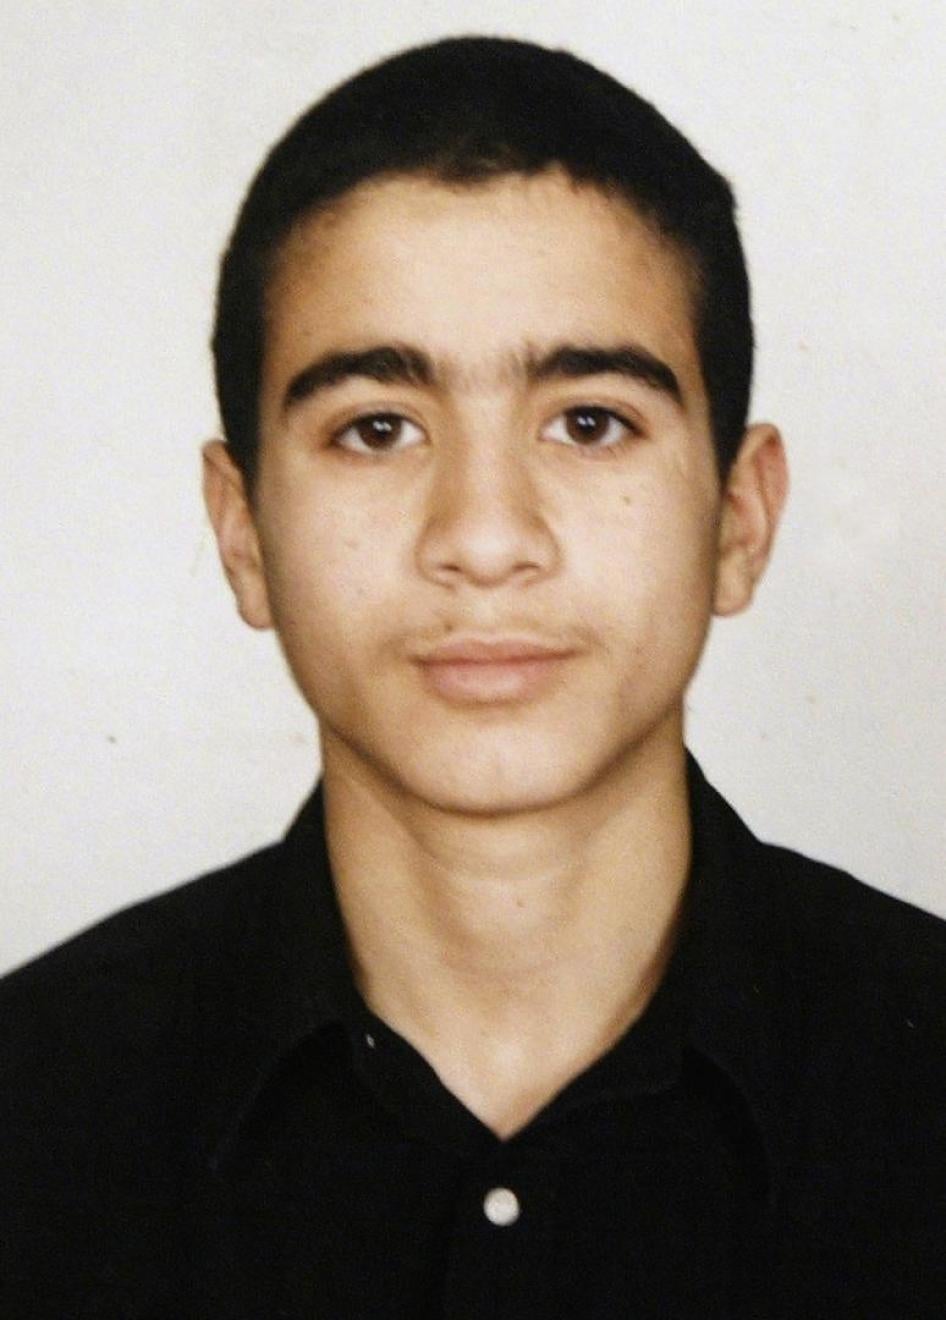 Omar Khadr was apprehended by US forces in Afghanistan after a firefight and detained when he was 16 at the Guantanamo Baydetention facility for 10 years. He was transferred to custody in Canada in 2012 and released in 2015.